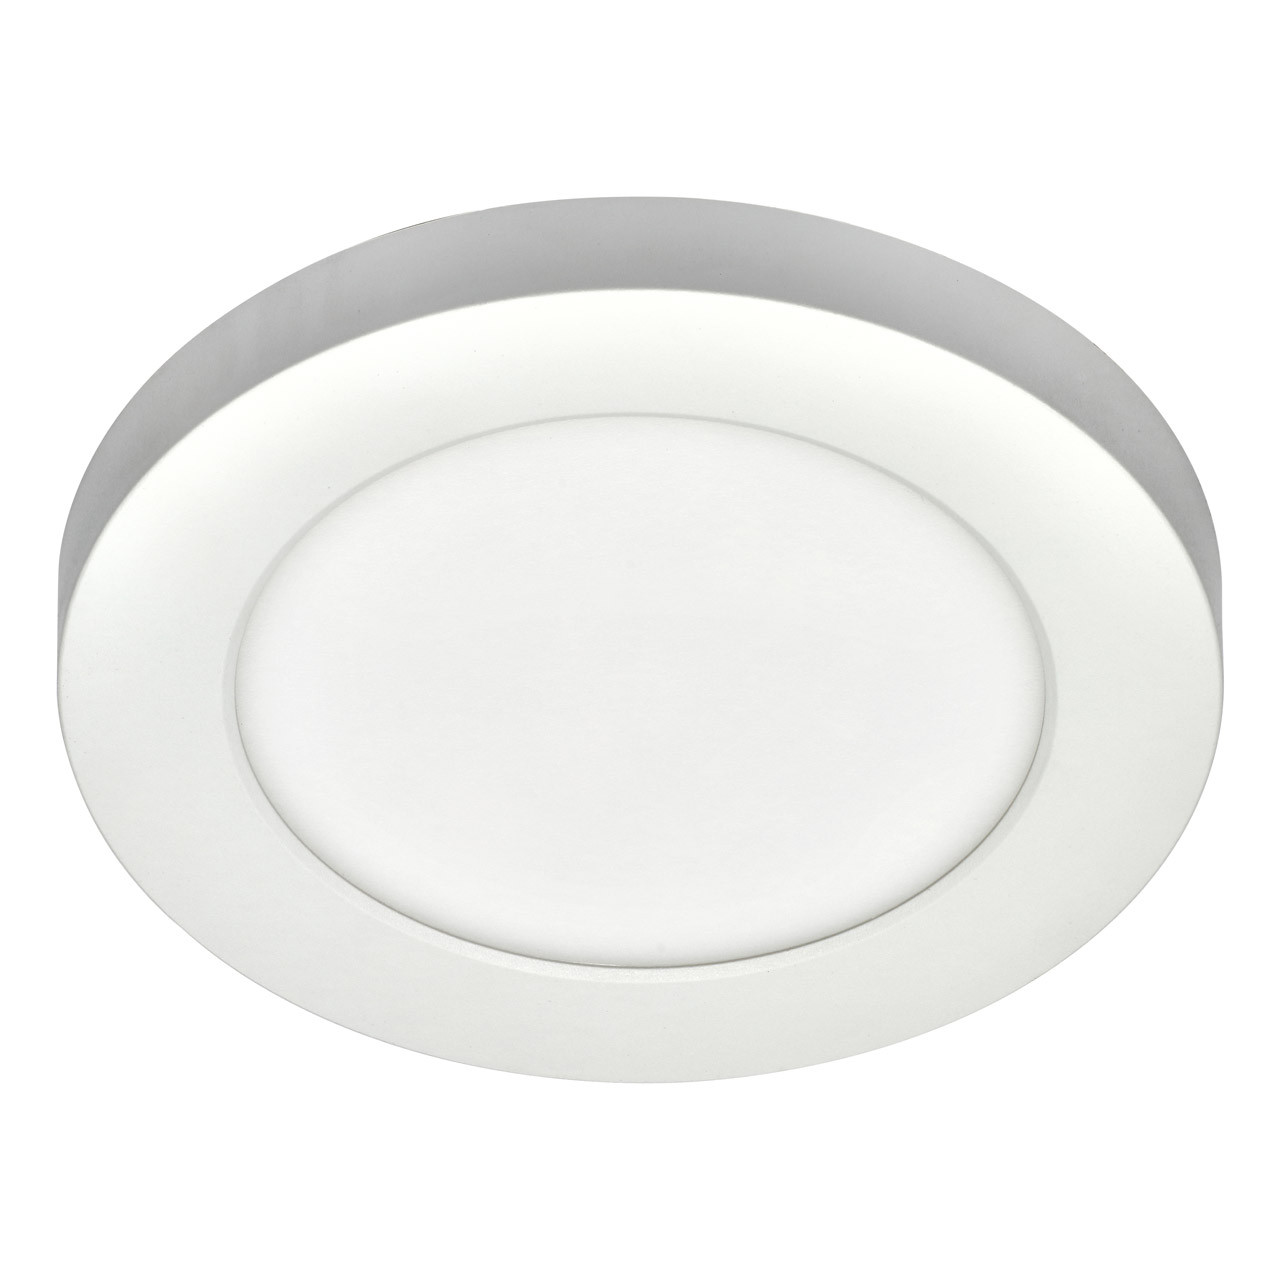 Photos - Chandelier / Lamp SPA 139mm Tauri LED Flush Ceiling Light 6W Tri-Colour CCT Opal and White S 